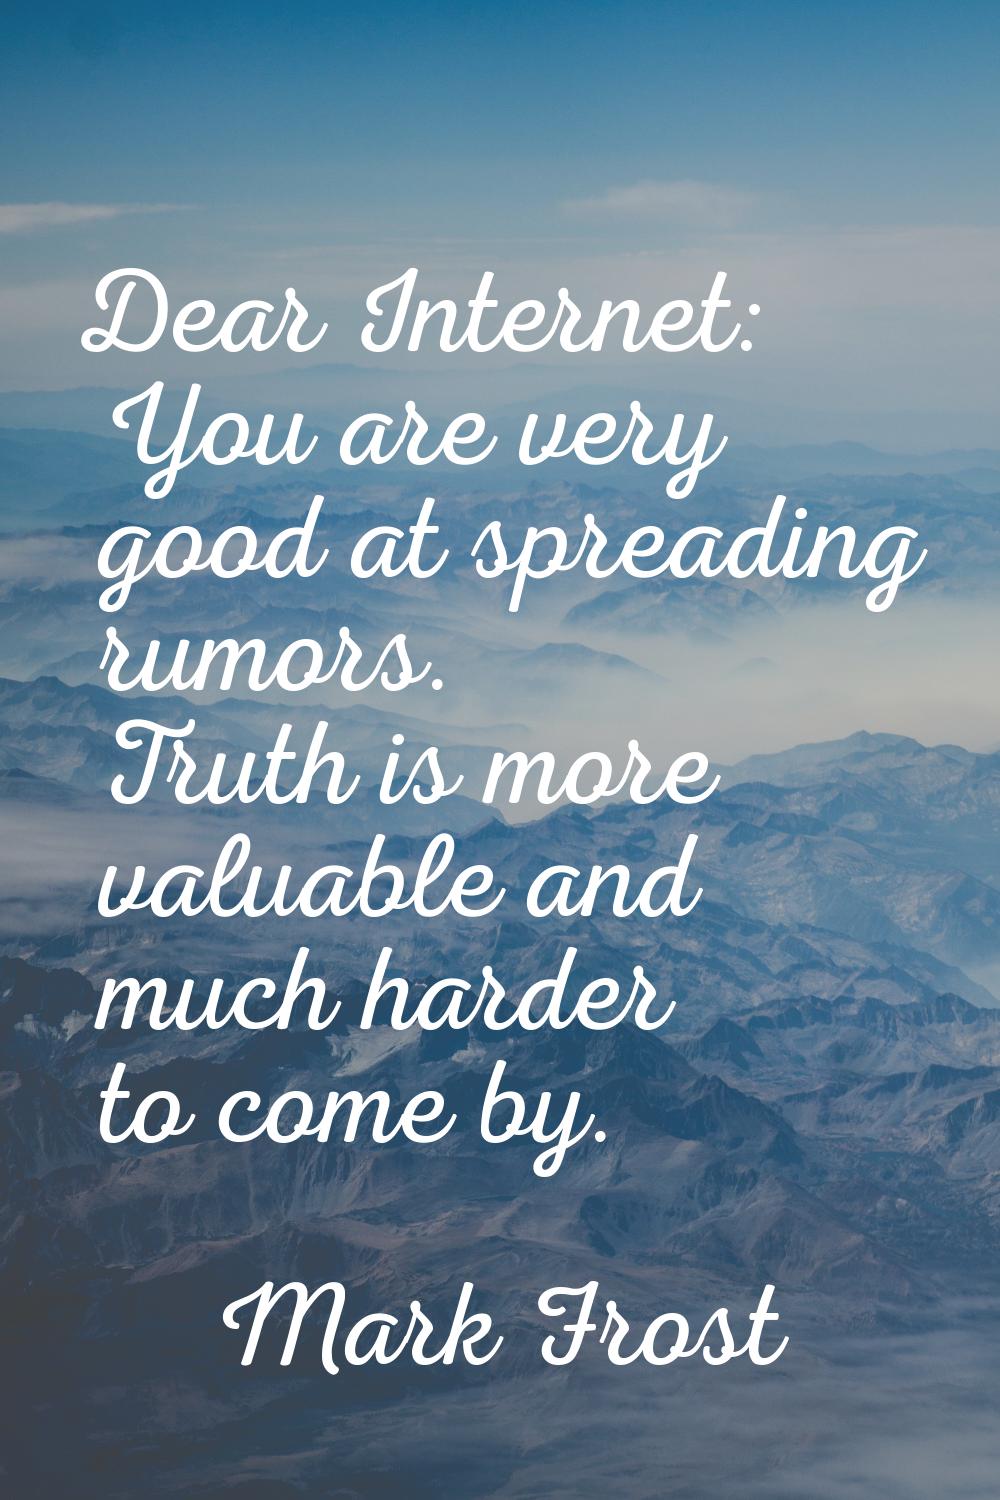 Dear Internet: You are very good at spreading rumors. Truth is more valuable and much harder to com